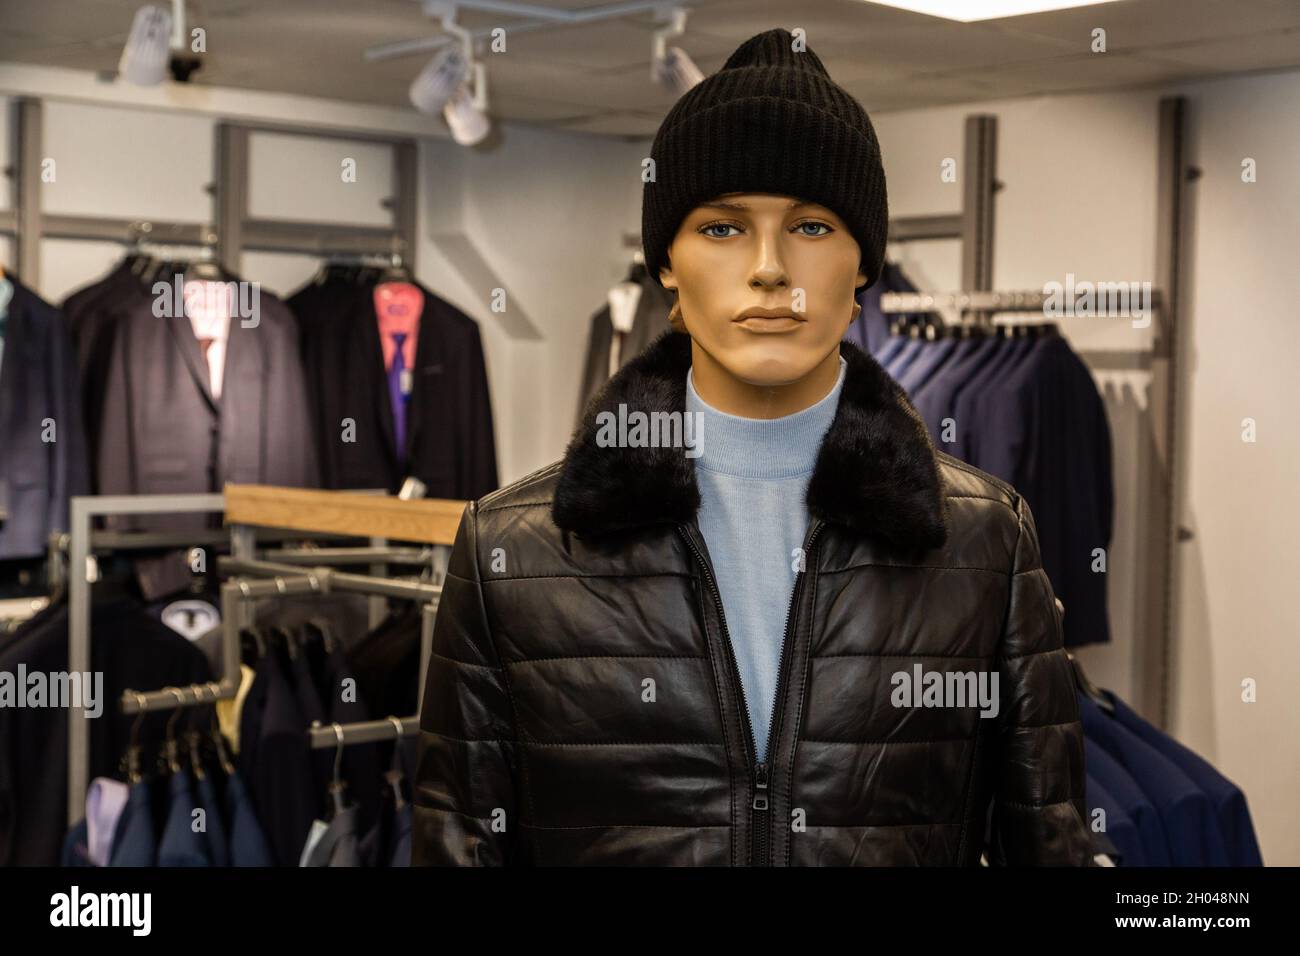 The male mannequin is dressed in fall, winter clothes, a gray turtleneck and a black hat. He is looking at the camera. Stock Photo